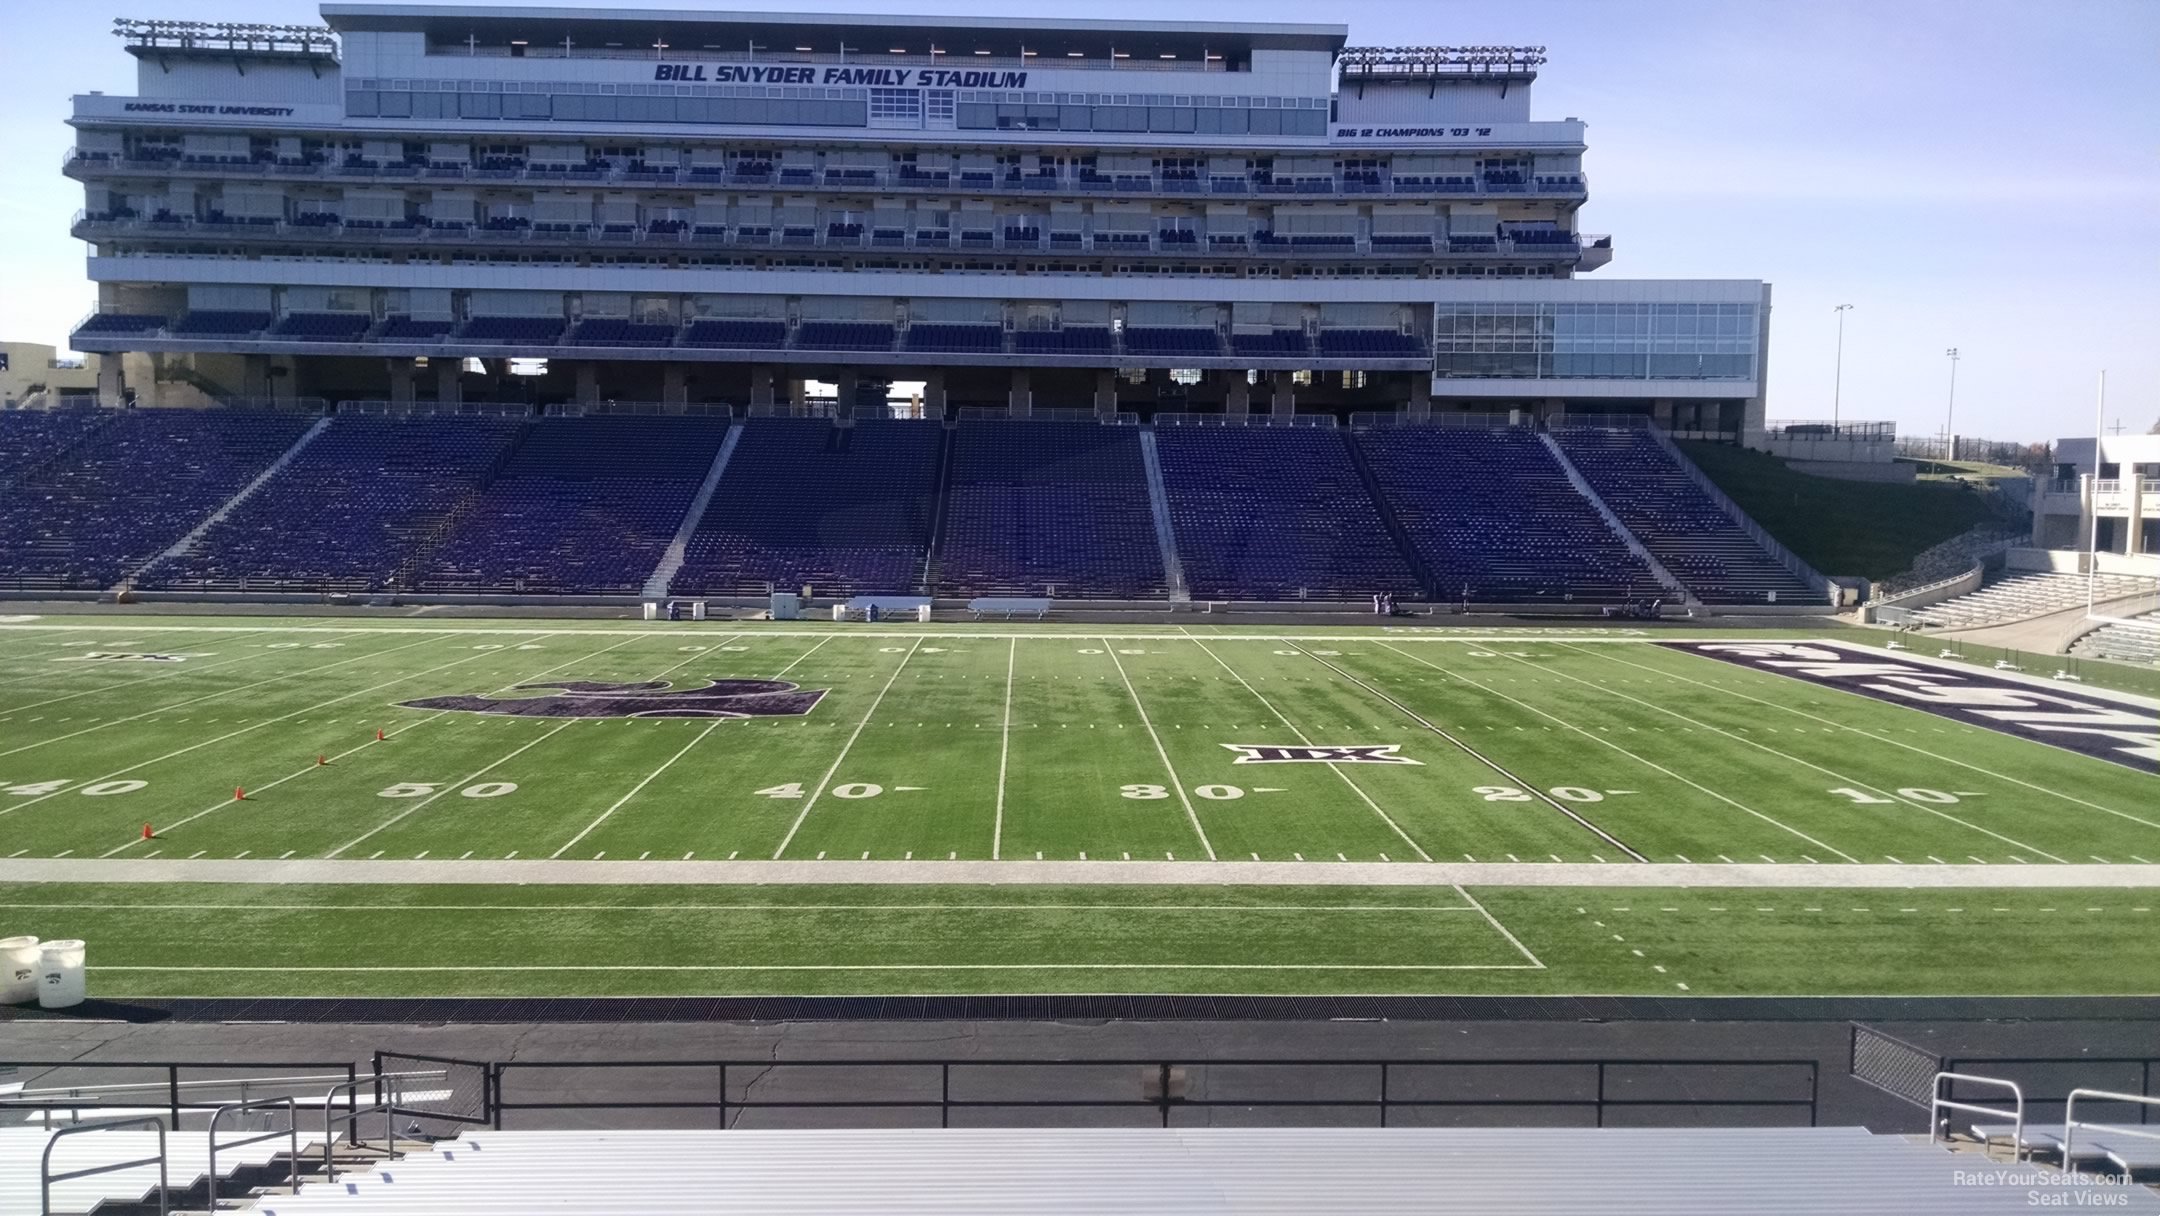 section 25, row 25 seat view  - bill snyder family stadium